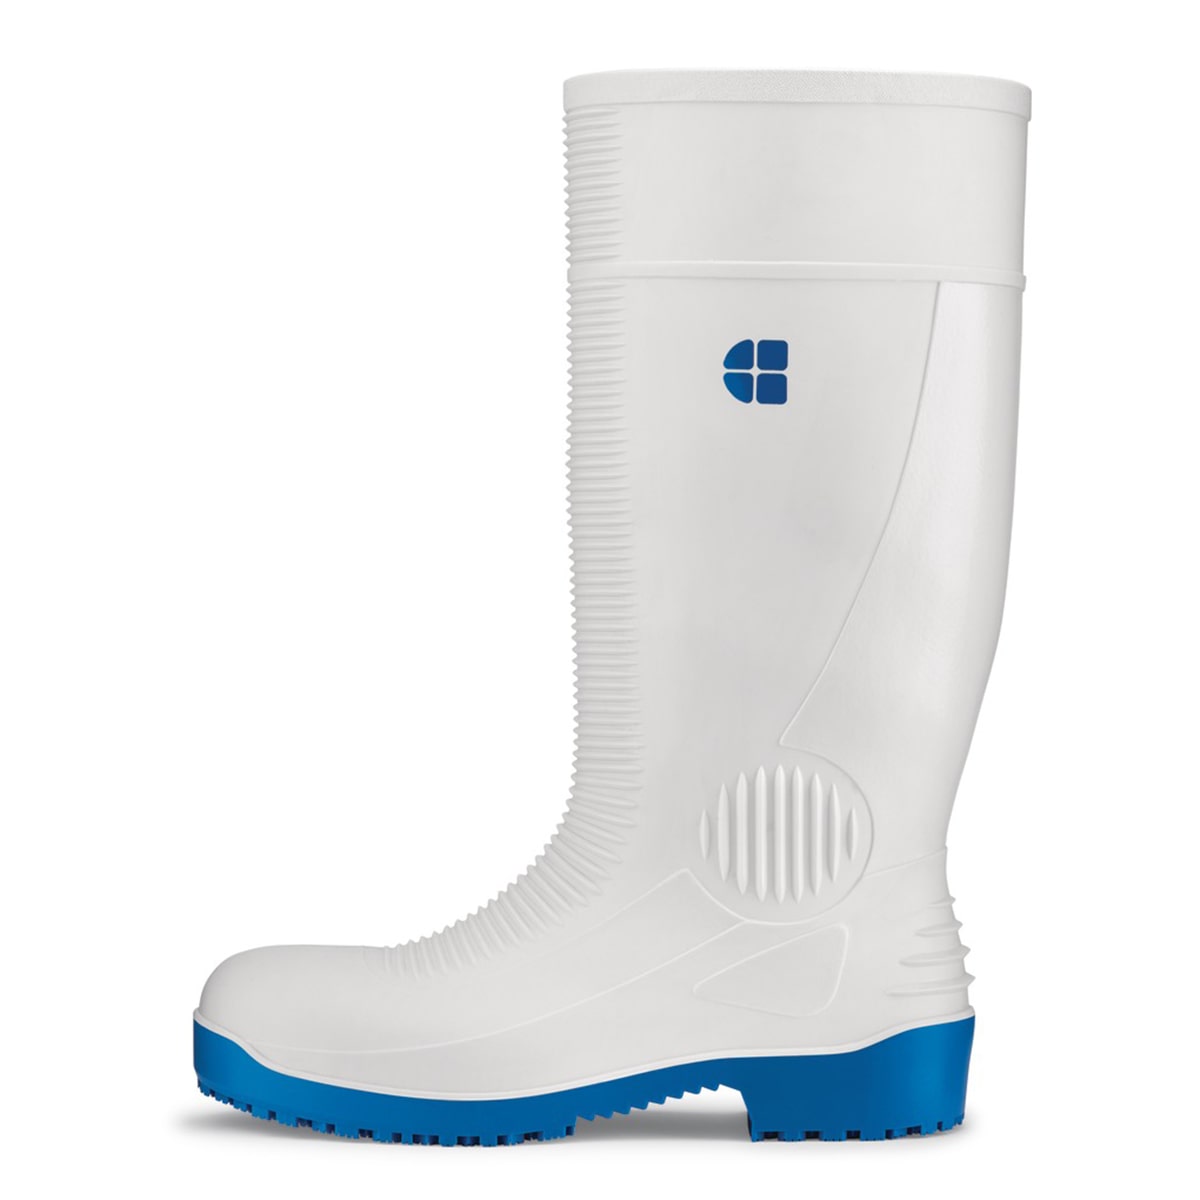 Slip-resistant white wellington boot with steel toe cap (200 Joules) and water-resistant upper, seen from the left.